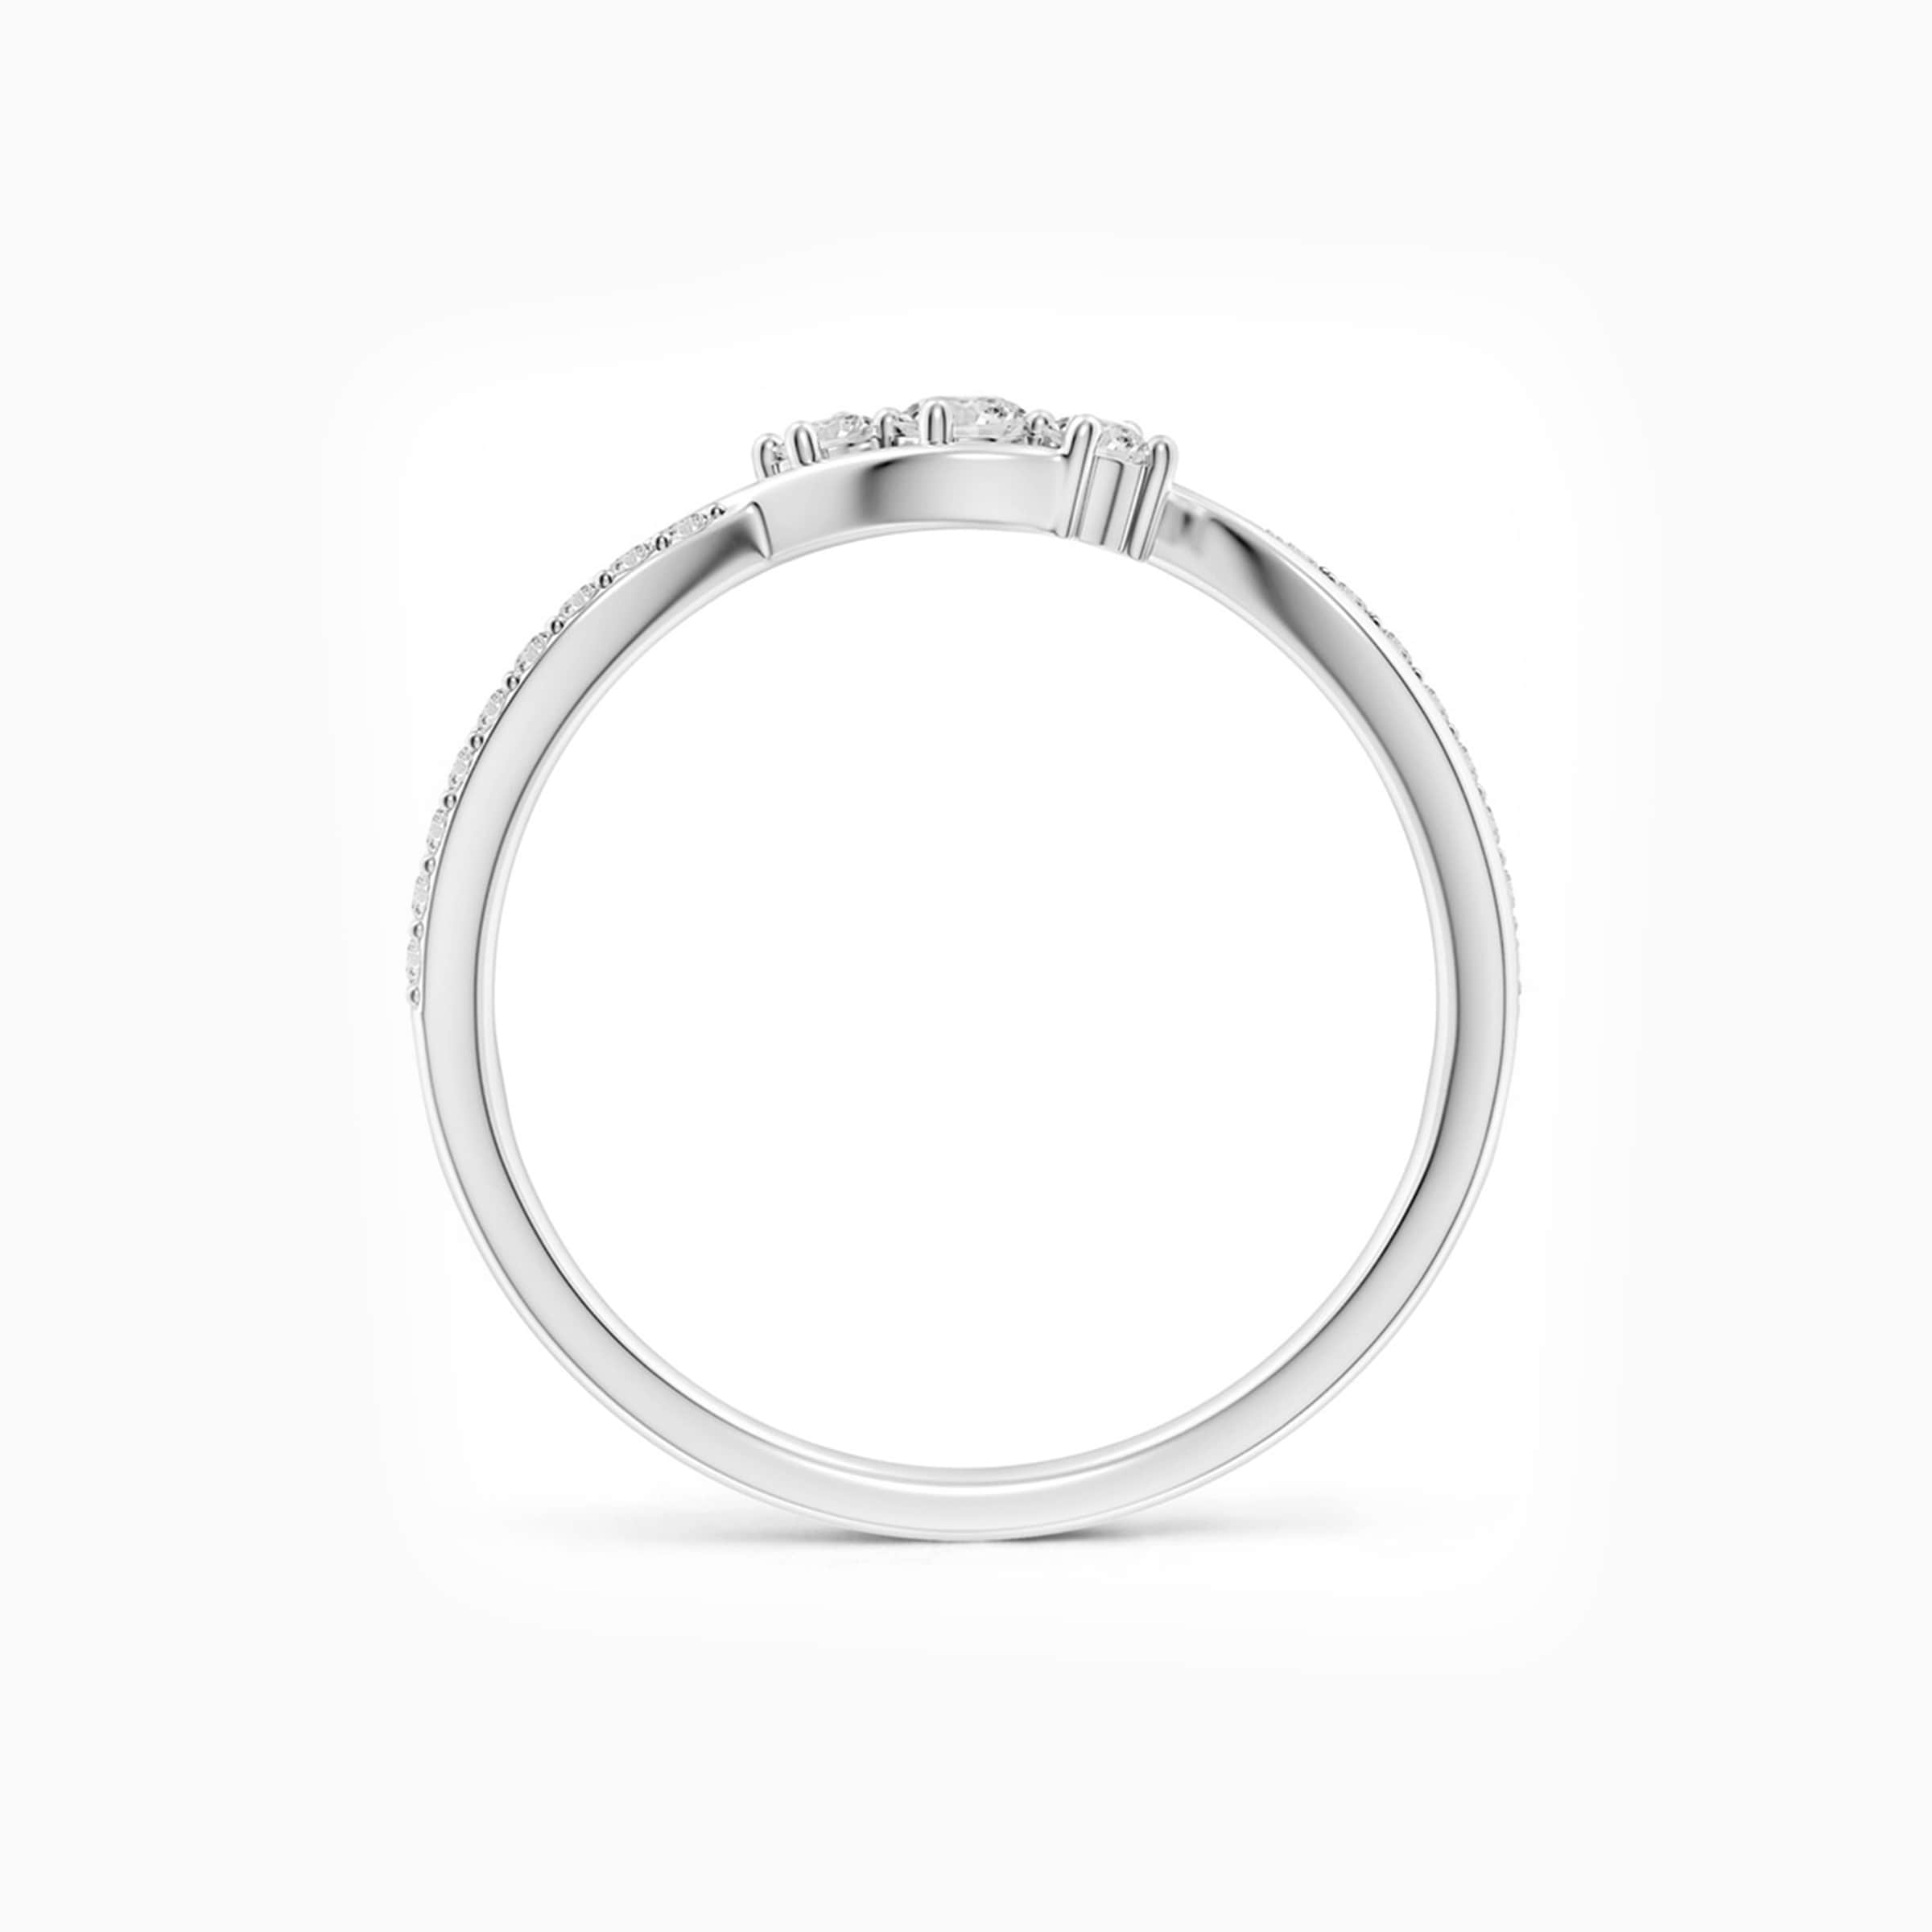 Darry Ring diamond promise ring for her front view